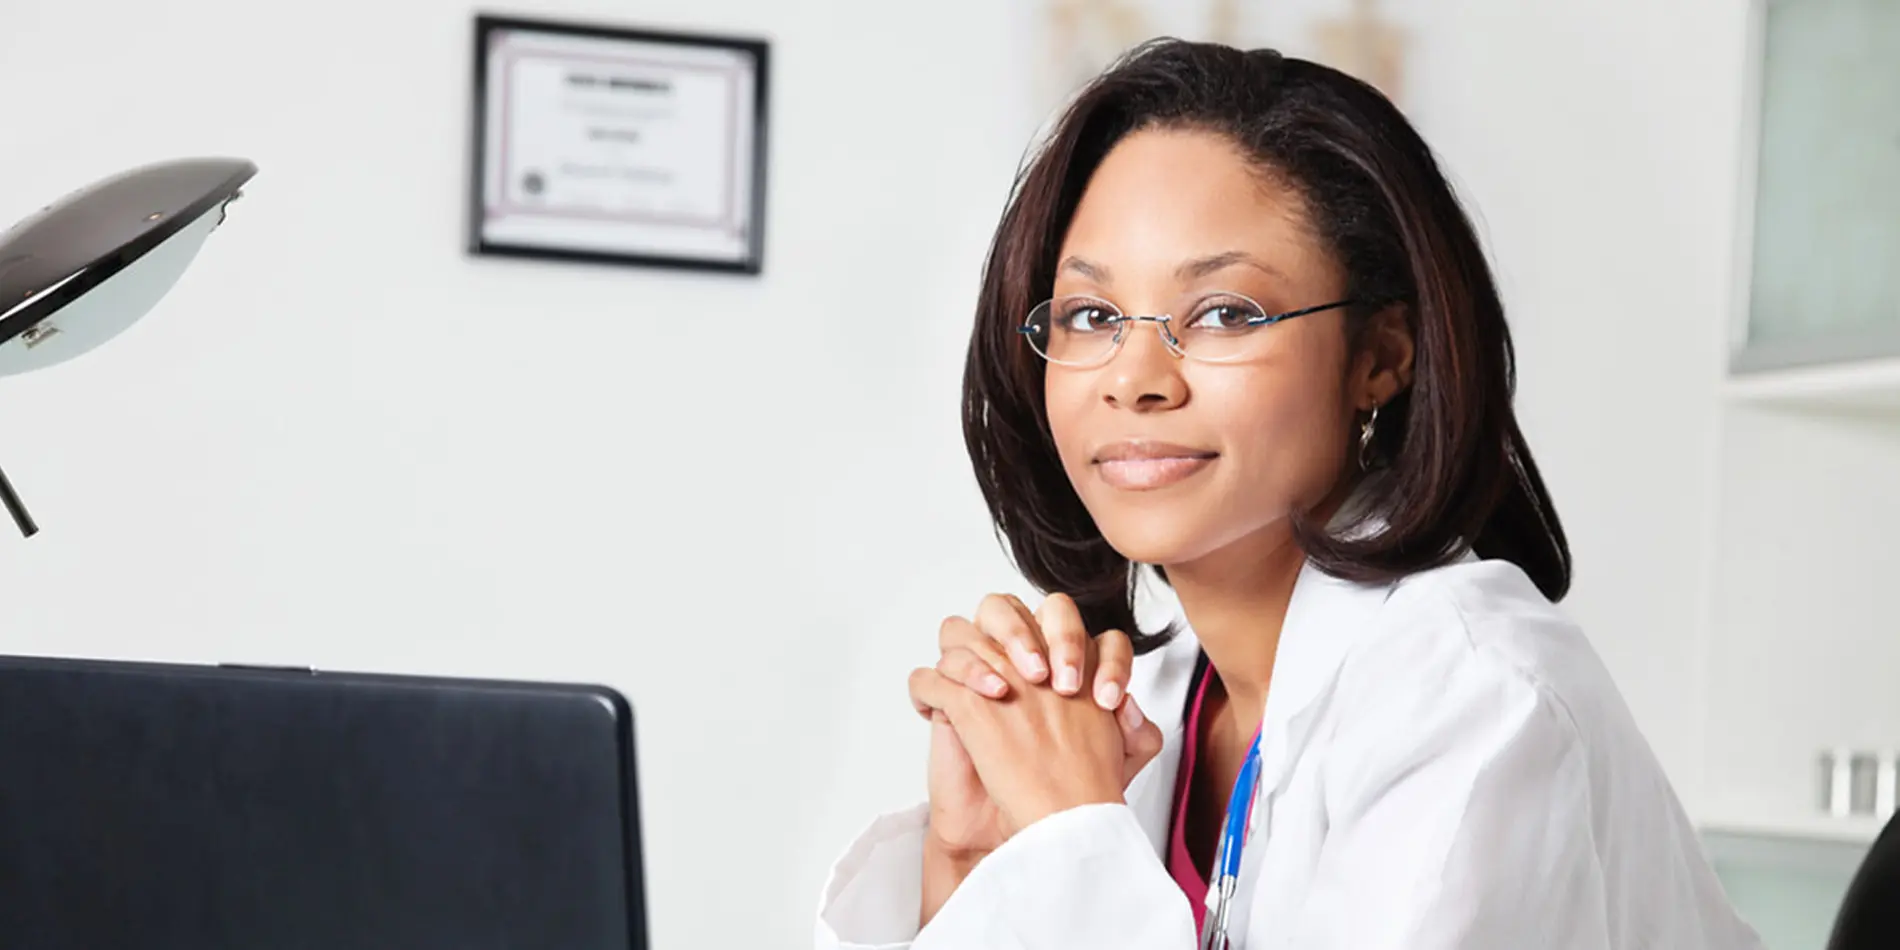 A woman wearing glasses sitting in front of a laptop computer wearing a lab coat and stethoscope. Her medical degree is hung up on the wall behind her.